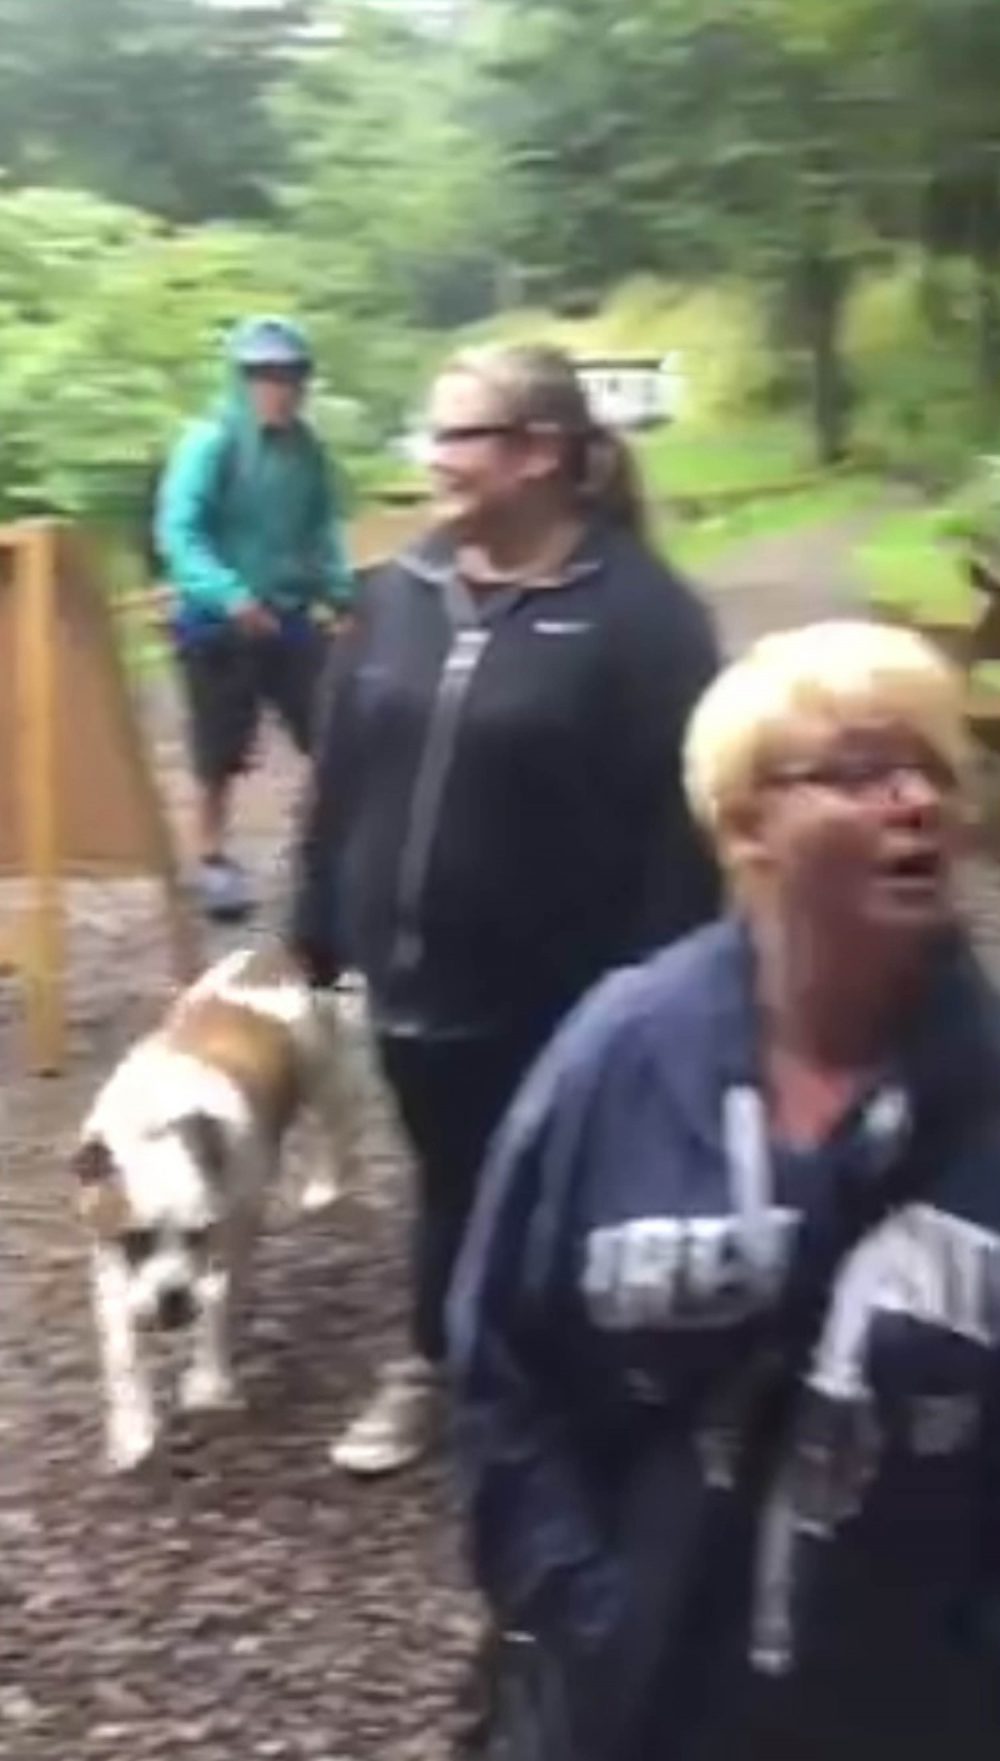 A VIDEO shows the moment a group of deaf thrill-seekers protested by sign language after they were banned from the zip wires. The eight-strong group turned up for a 30th birthday party but were refused entry because they could not understand safety instructions. Lynda McQueen and her friends claim they are victims of "sickening discrimination" because they requested an interpreter two days earlier. The video shows the furious women using sign language to vent their anger and penning protest notes to staff at Go Ape, Peebles, Scottish Borders. The firm has since apologised for turning away the group - just three months after it said sorry for refusing entry to two women in Rugeley, Staffs. Birthday girl Lynda booked the £33-per-person adventure assault course last month and contacted staff two days before to request an interpreter. However staff didn't get back in touch until 20 minutes after the women, who had travelled from all over Scotland, had arrived.